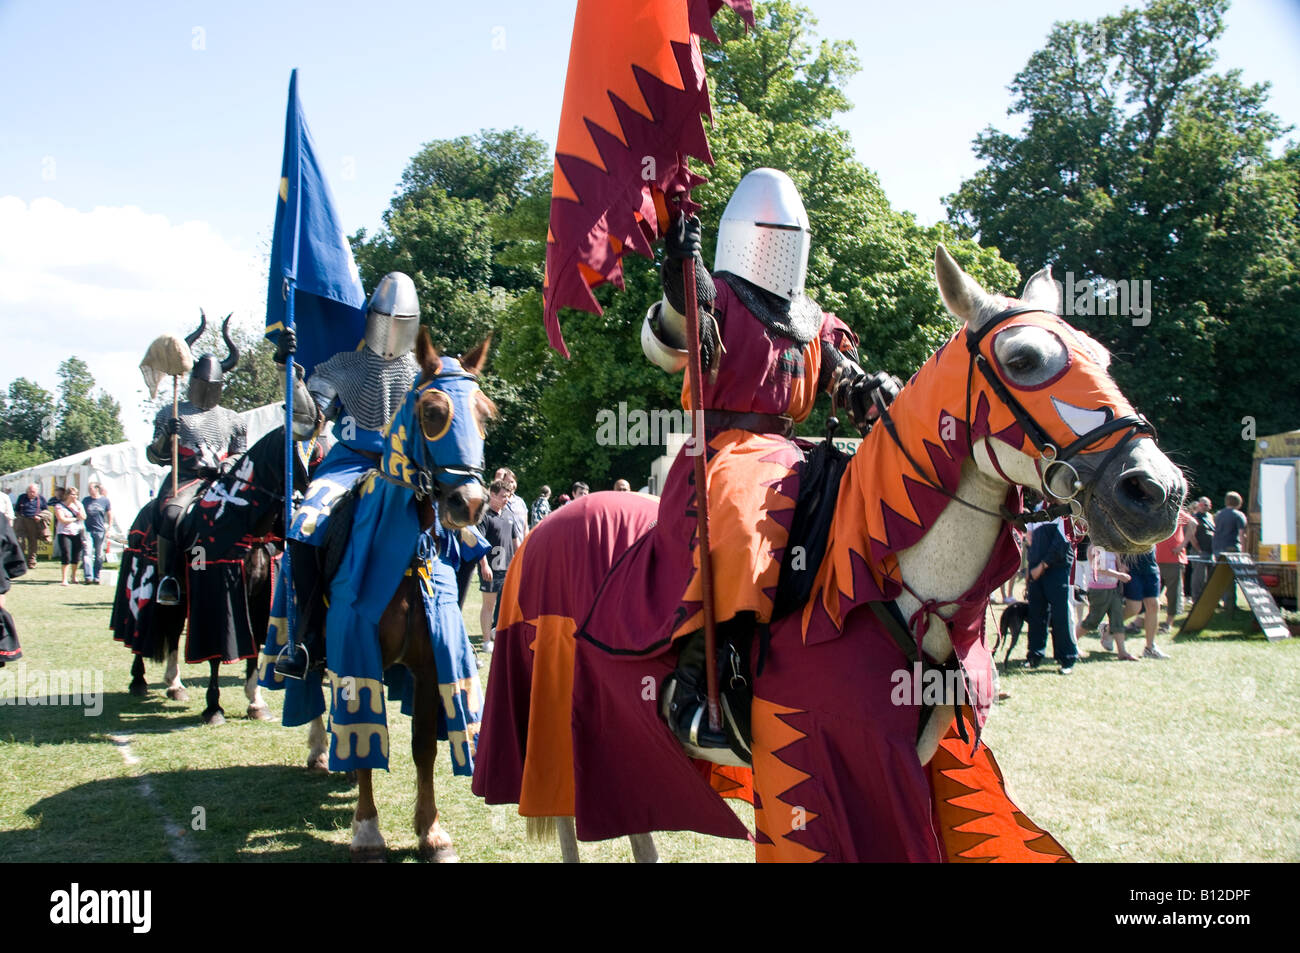 Knights on horseback, with armour, carrying colours (flags) during a medieval fair re-enactment Stock Photo